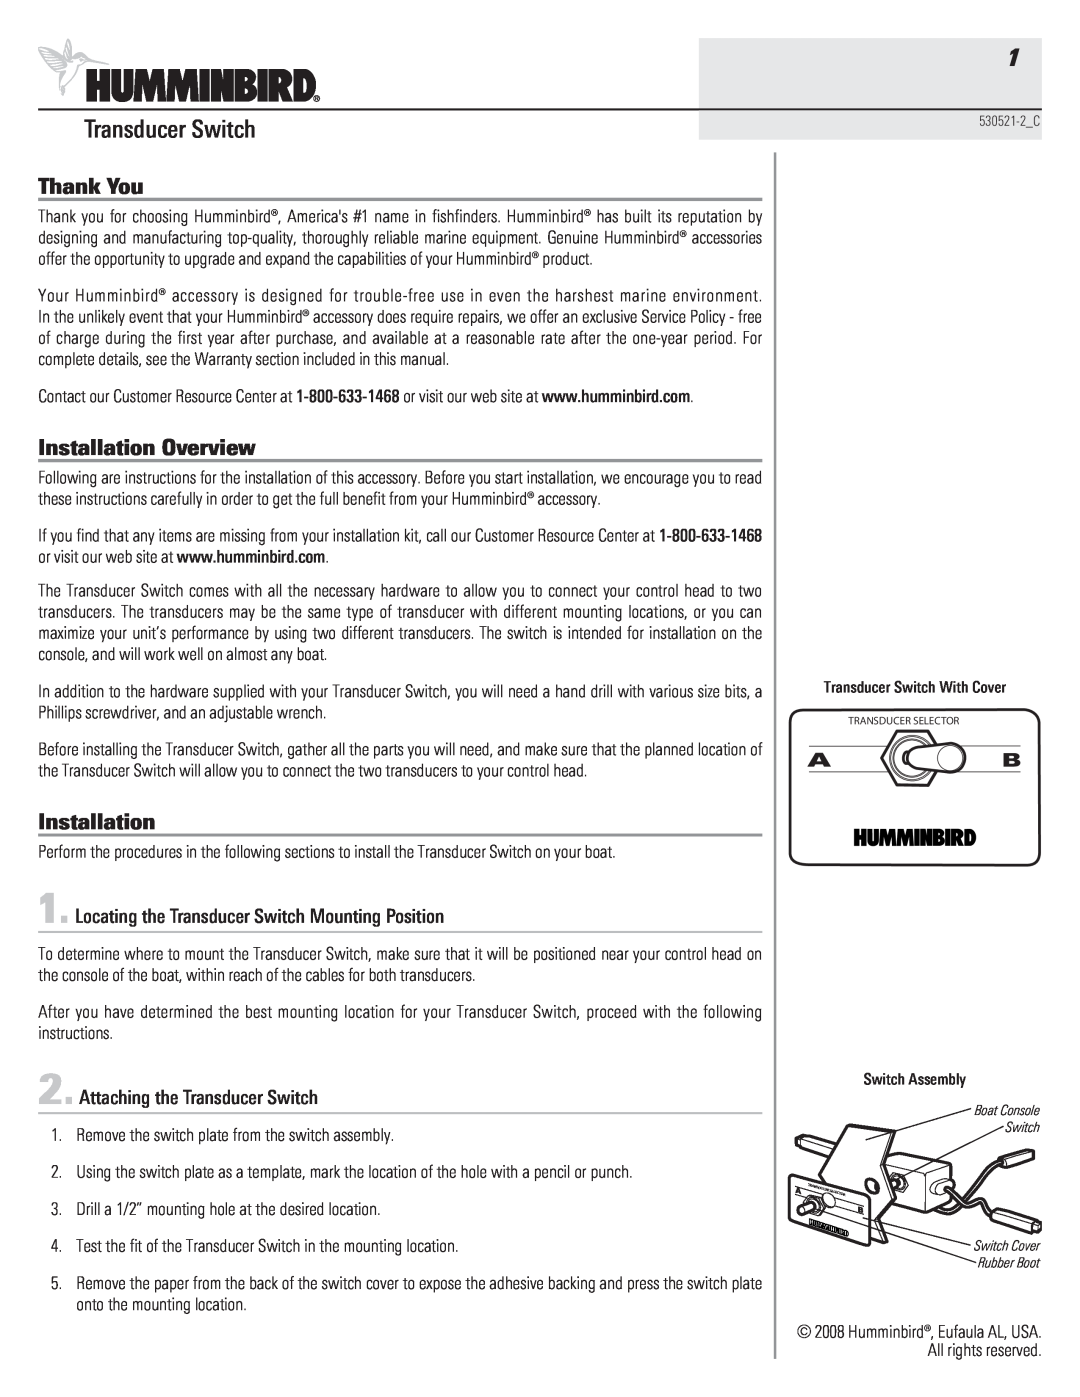 Humminbird 530521-2_C warranty Thank You, Installation Overview, Attaching the Transducer Switch, A B 